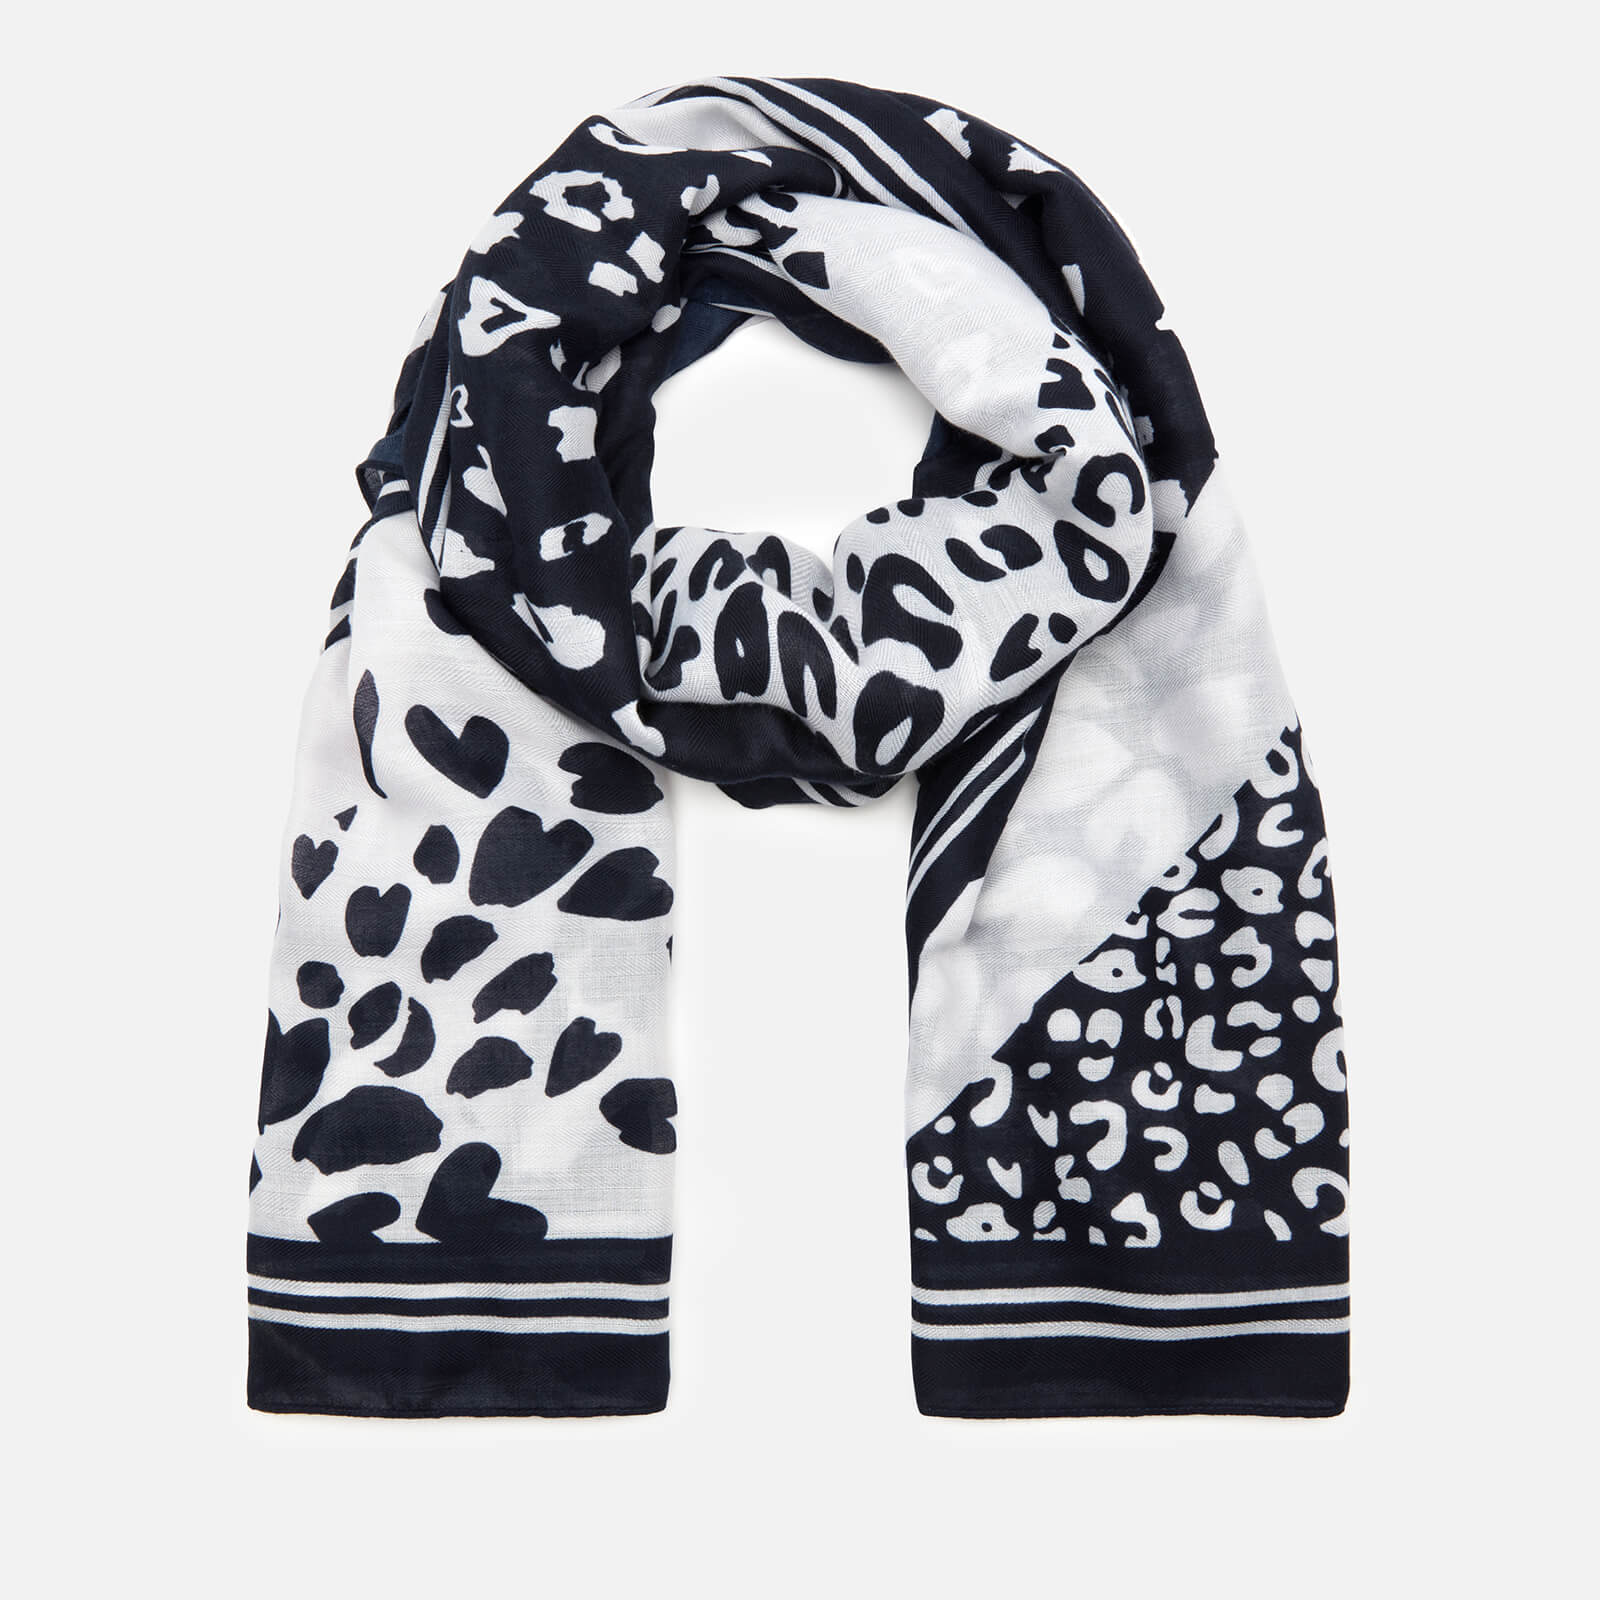 joules women's river large woven scarf - multi animal